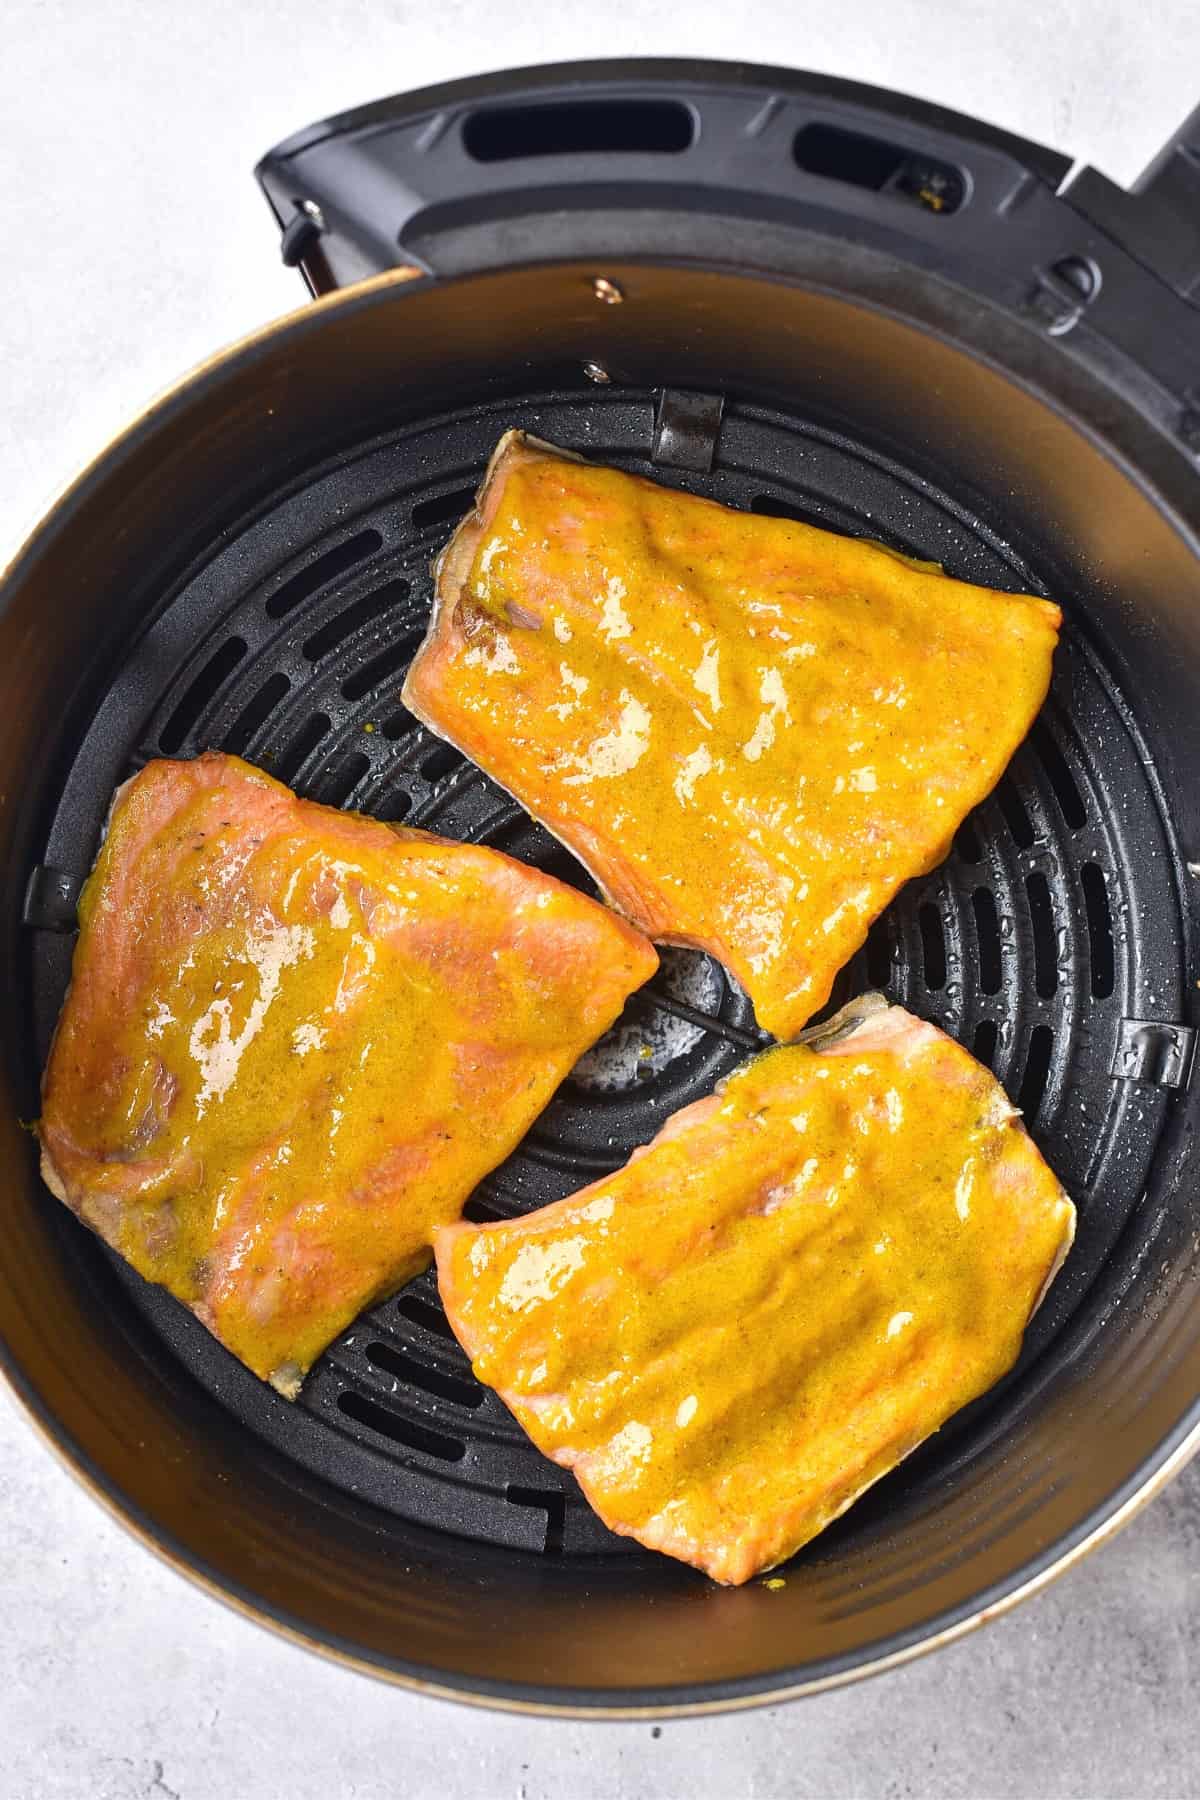 Salmon fillets brushed with yellow marinade in air fryer basket.